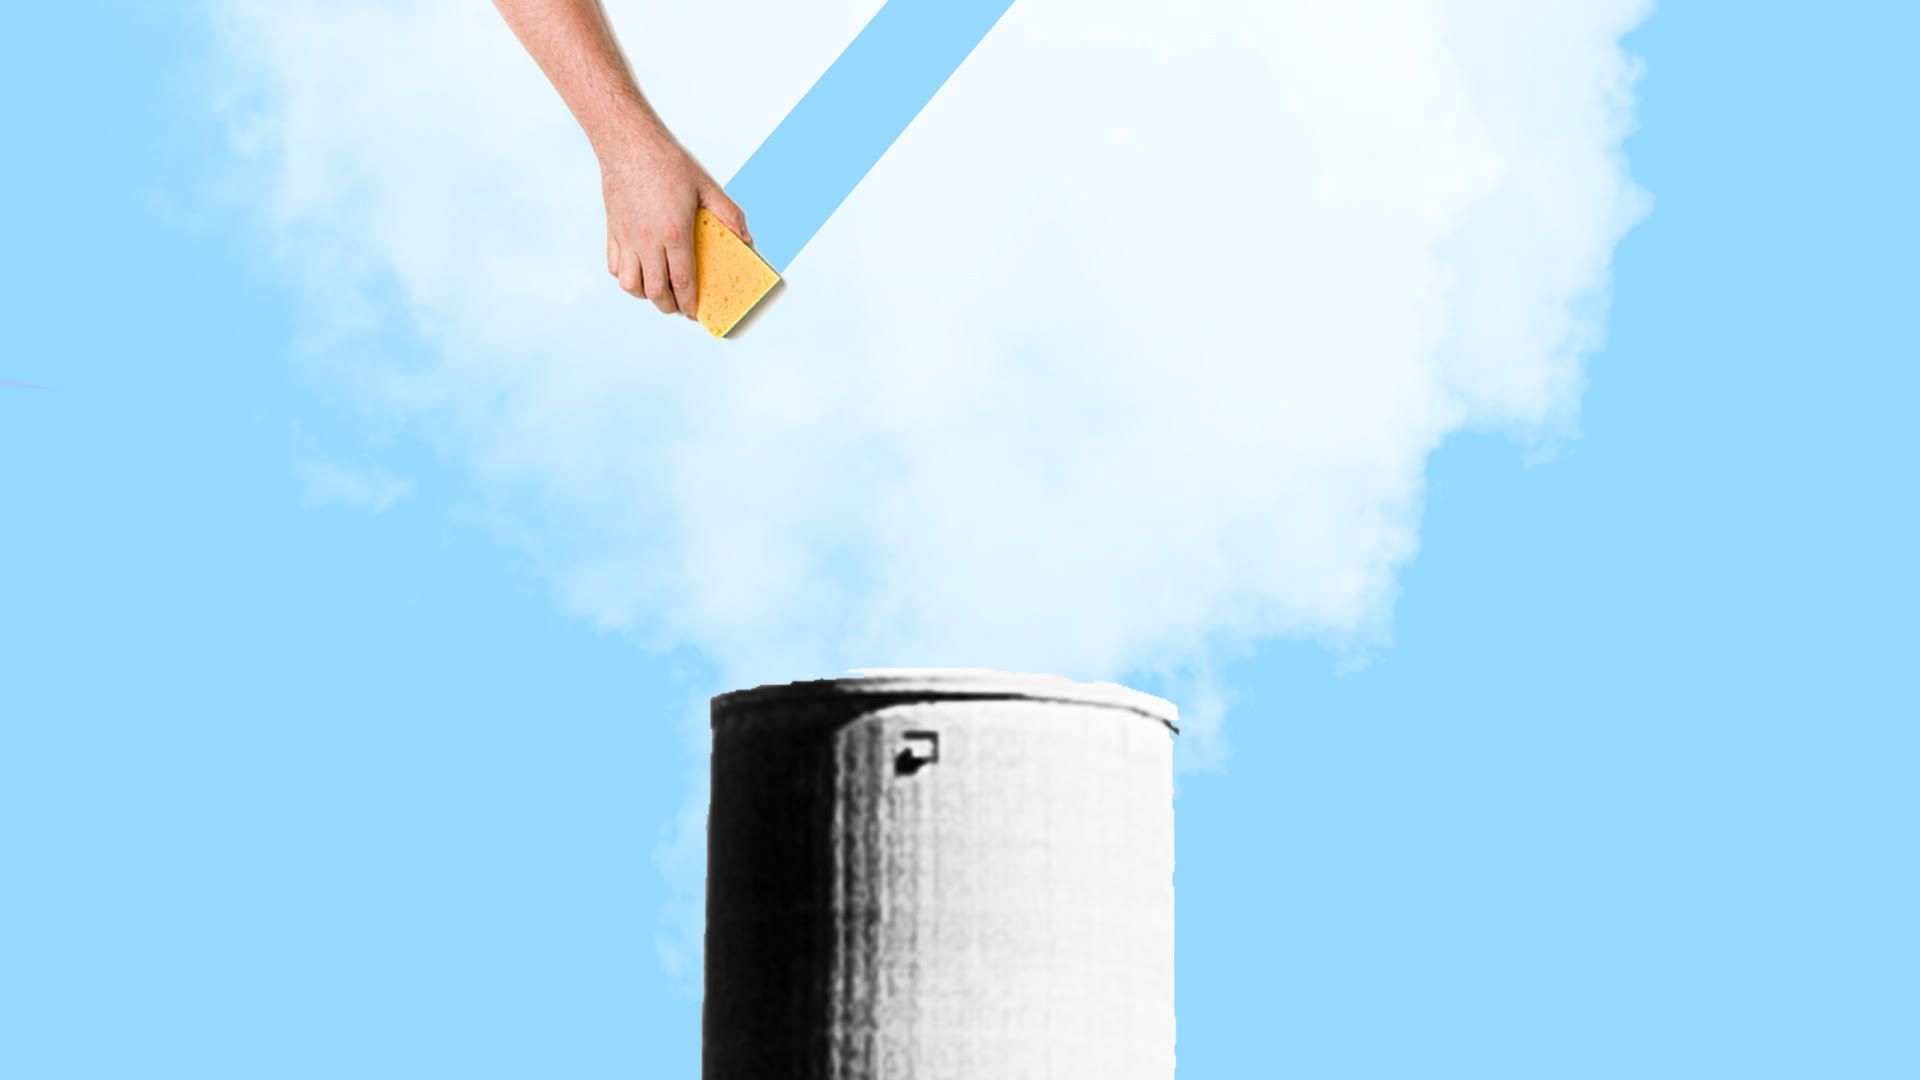 Illustration of a sponge cleaning emissions from a smokestack